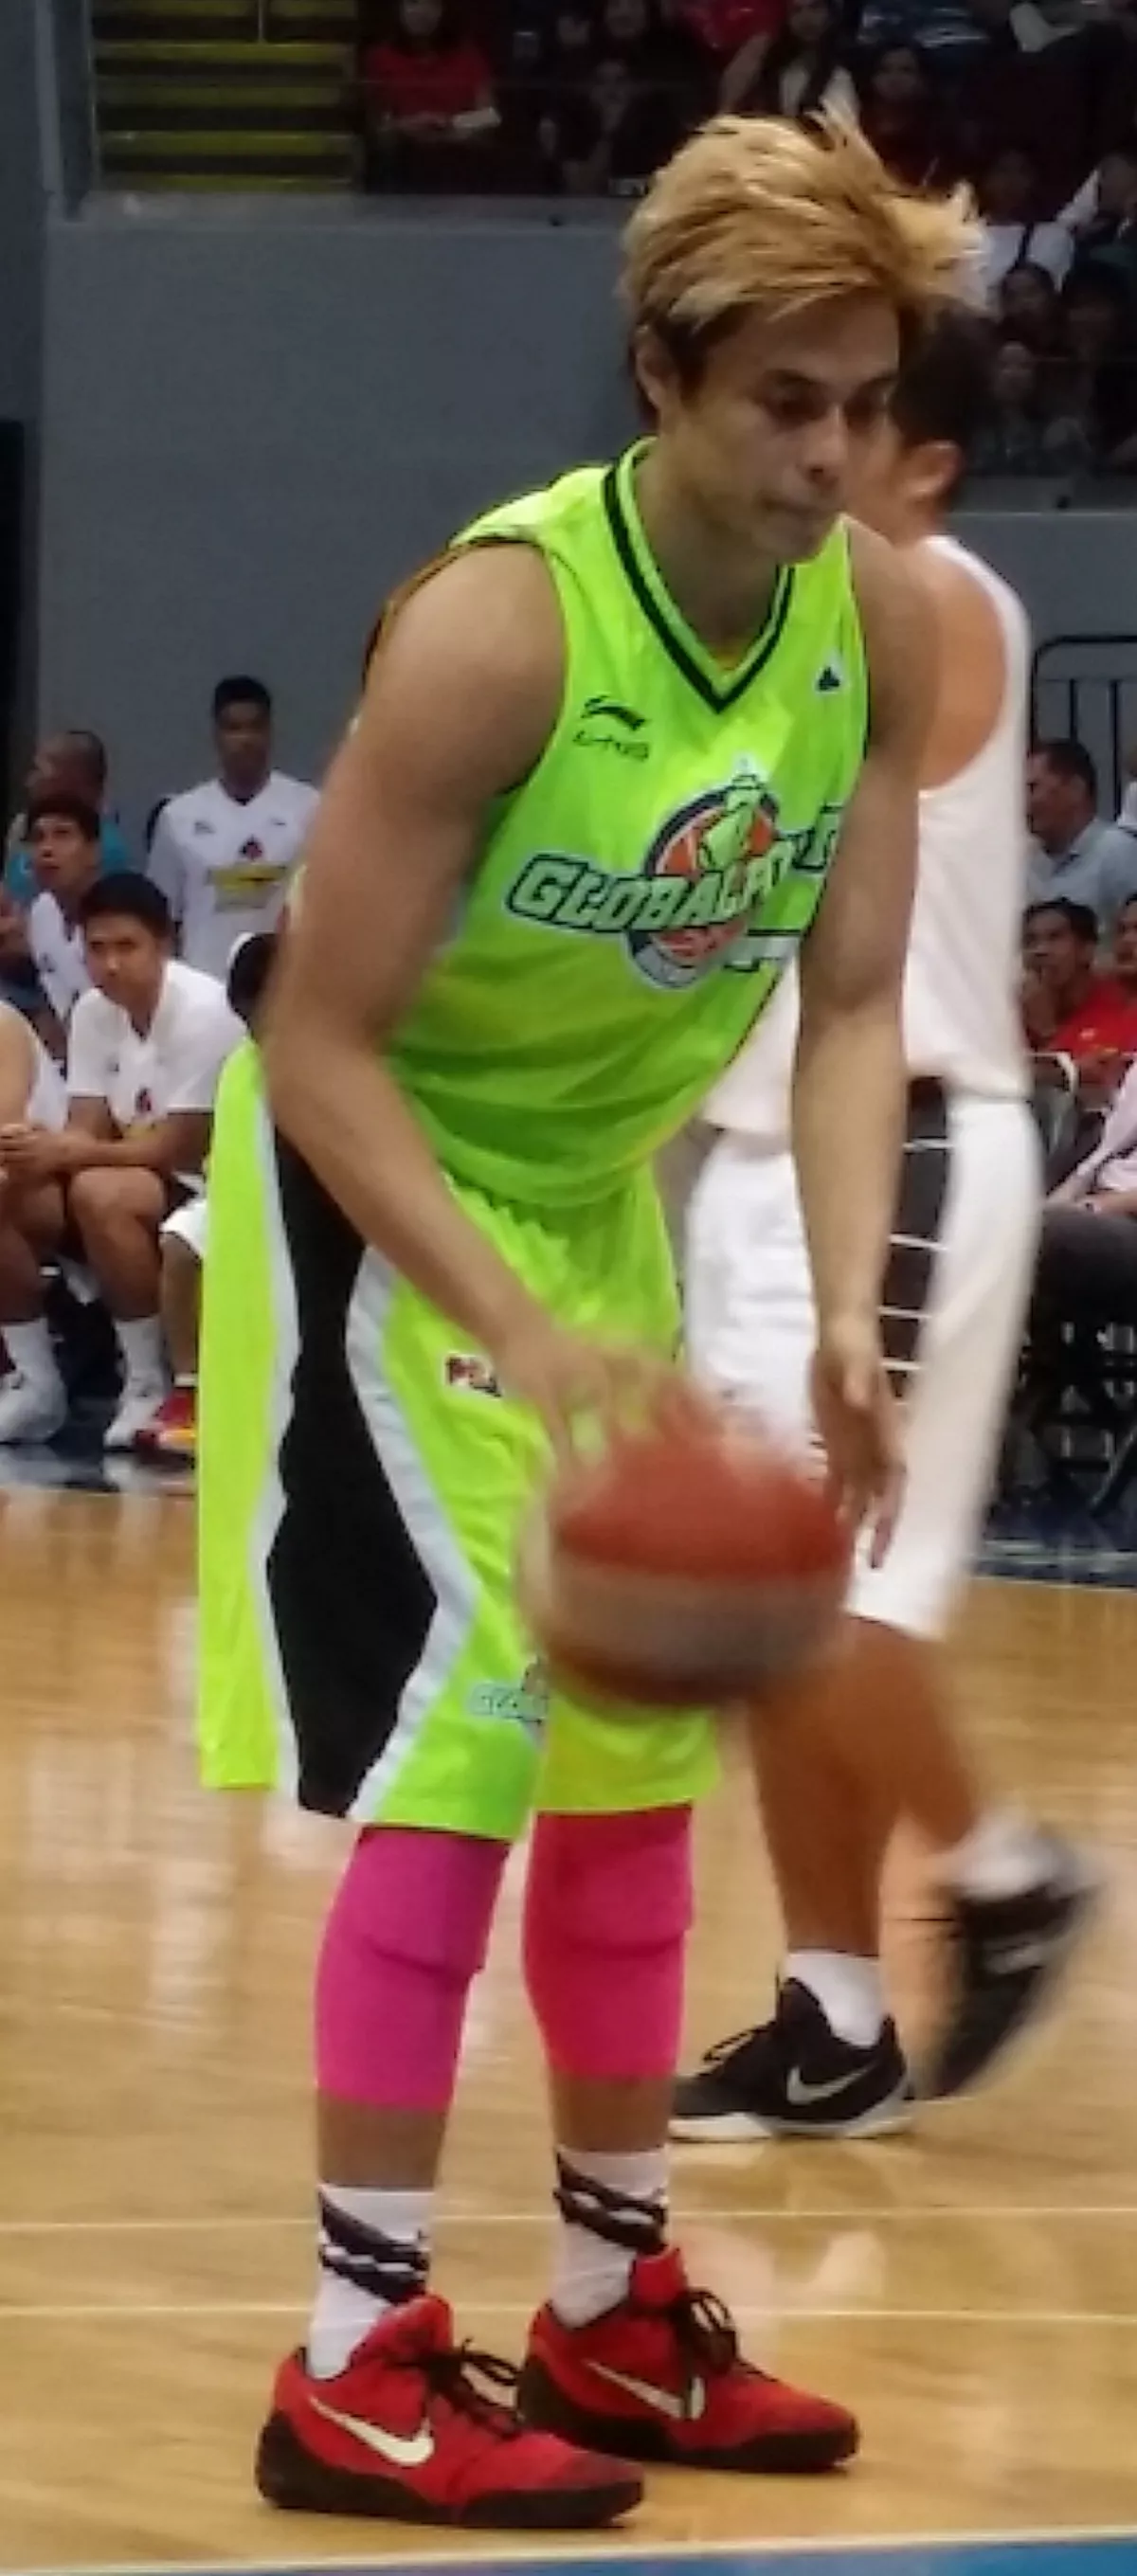 33 Facts About Terrence Romeo | FactSnippet